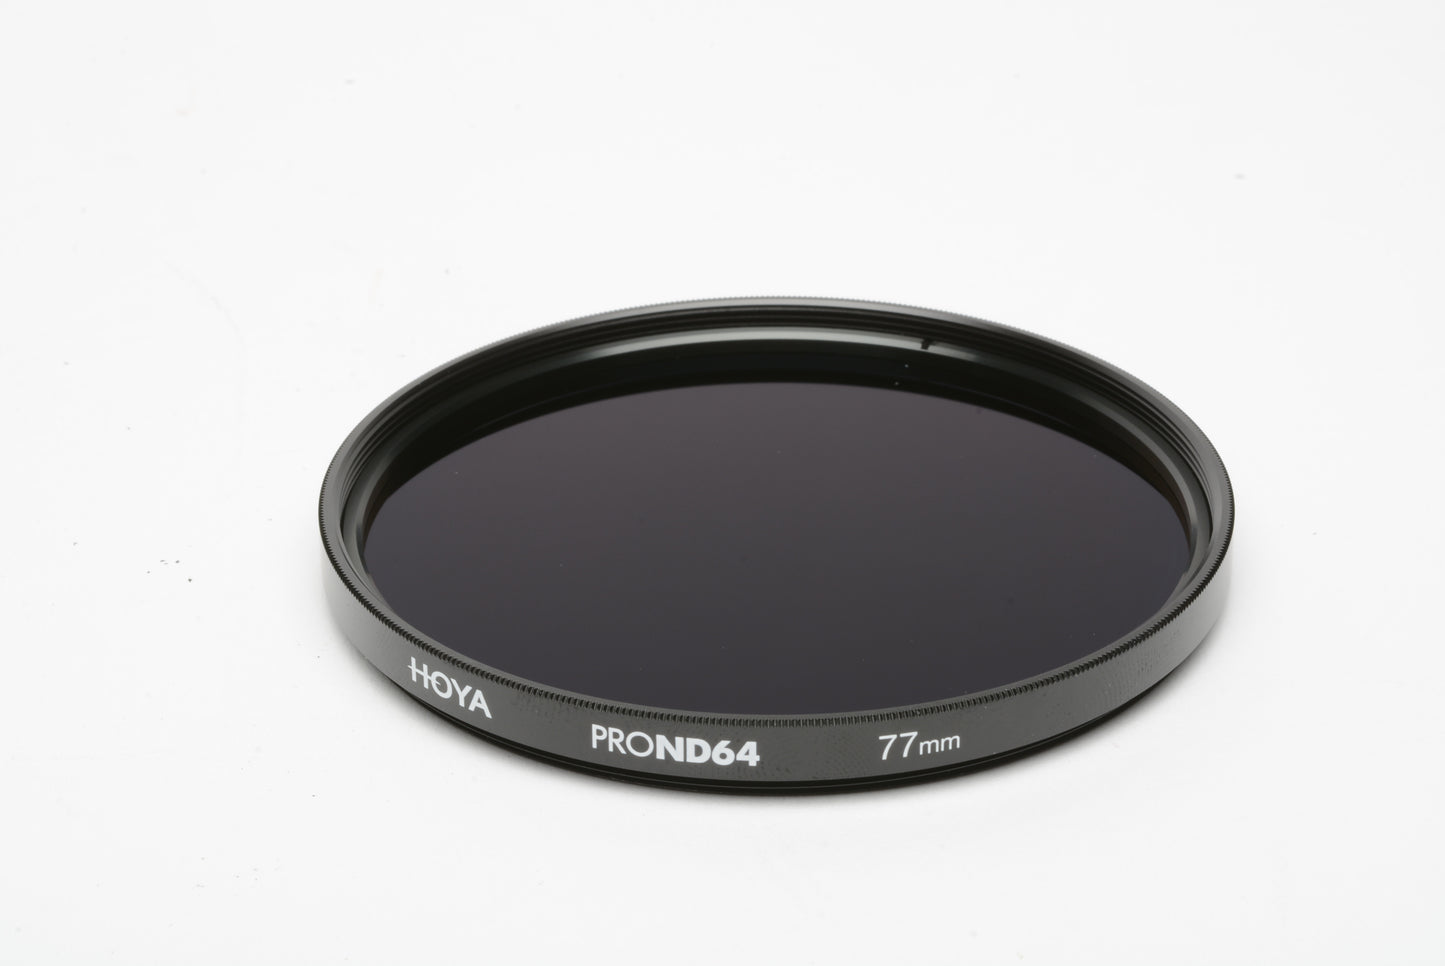 Hoya PROND 77mm ND64 (1.8) 6 Stop ACCU-ND Neutral Density Filter in jewel case, clean